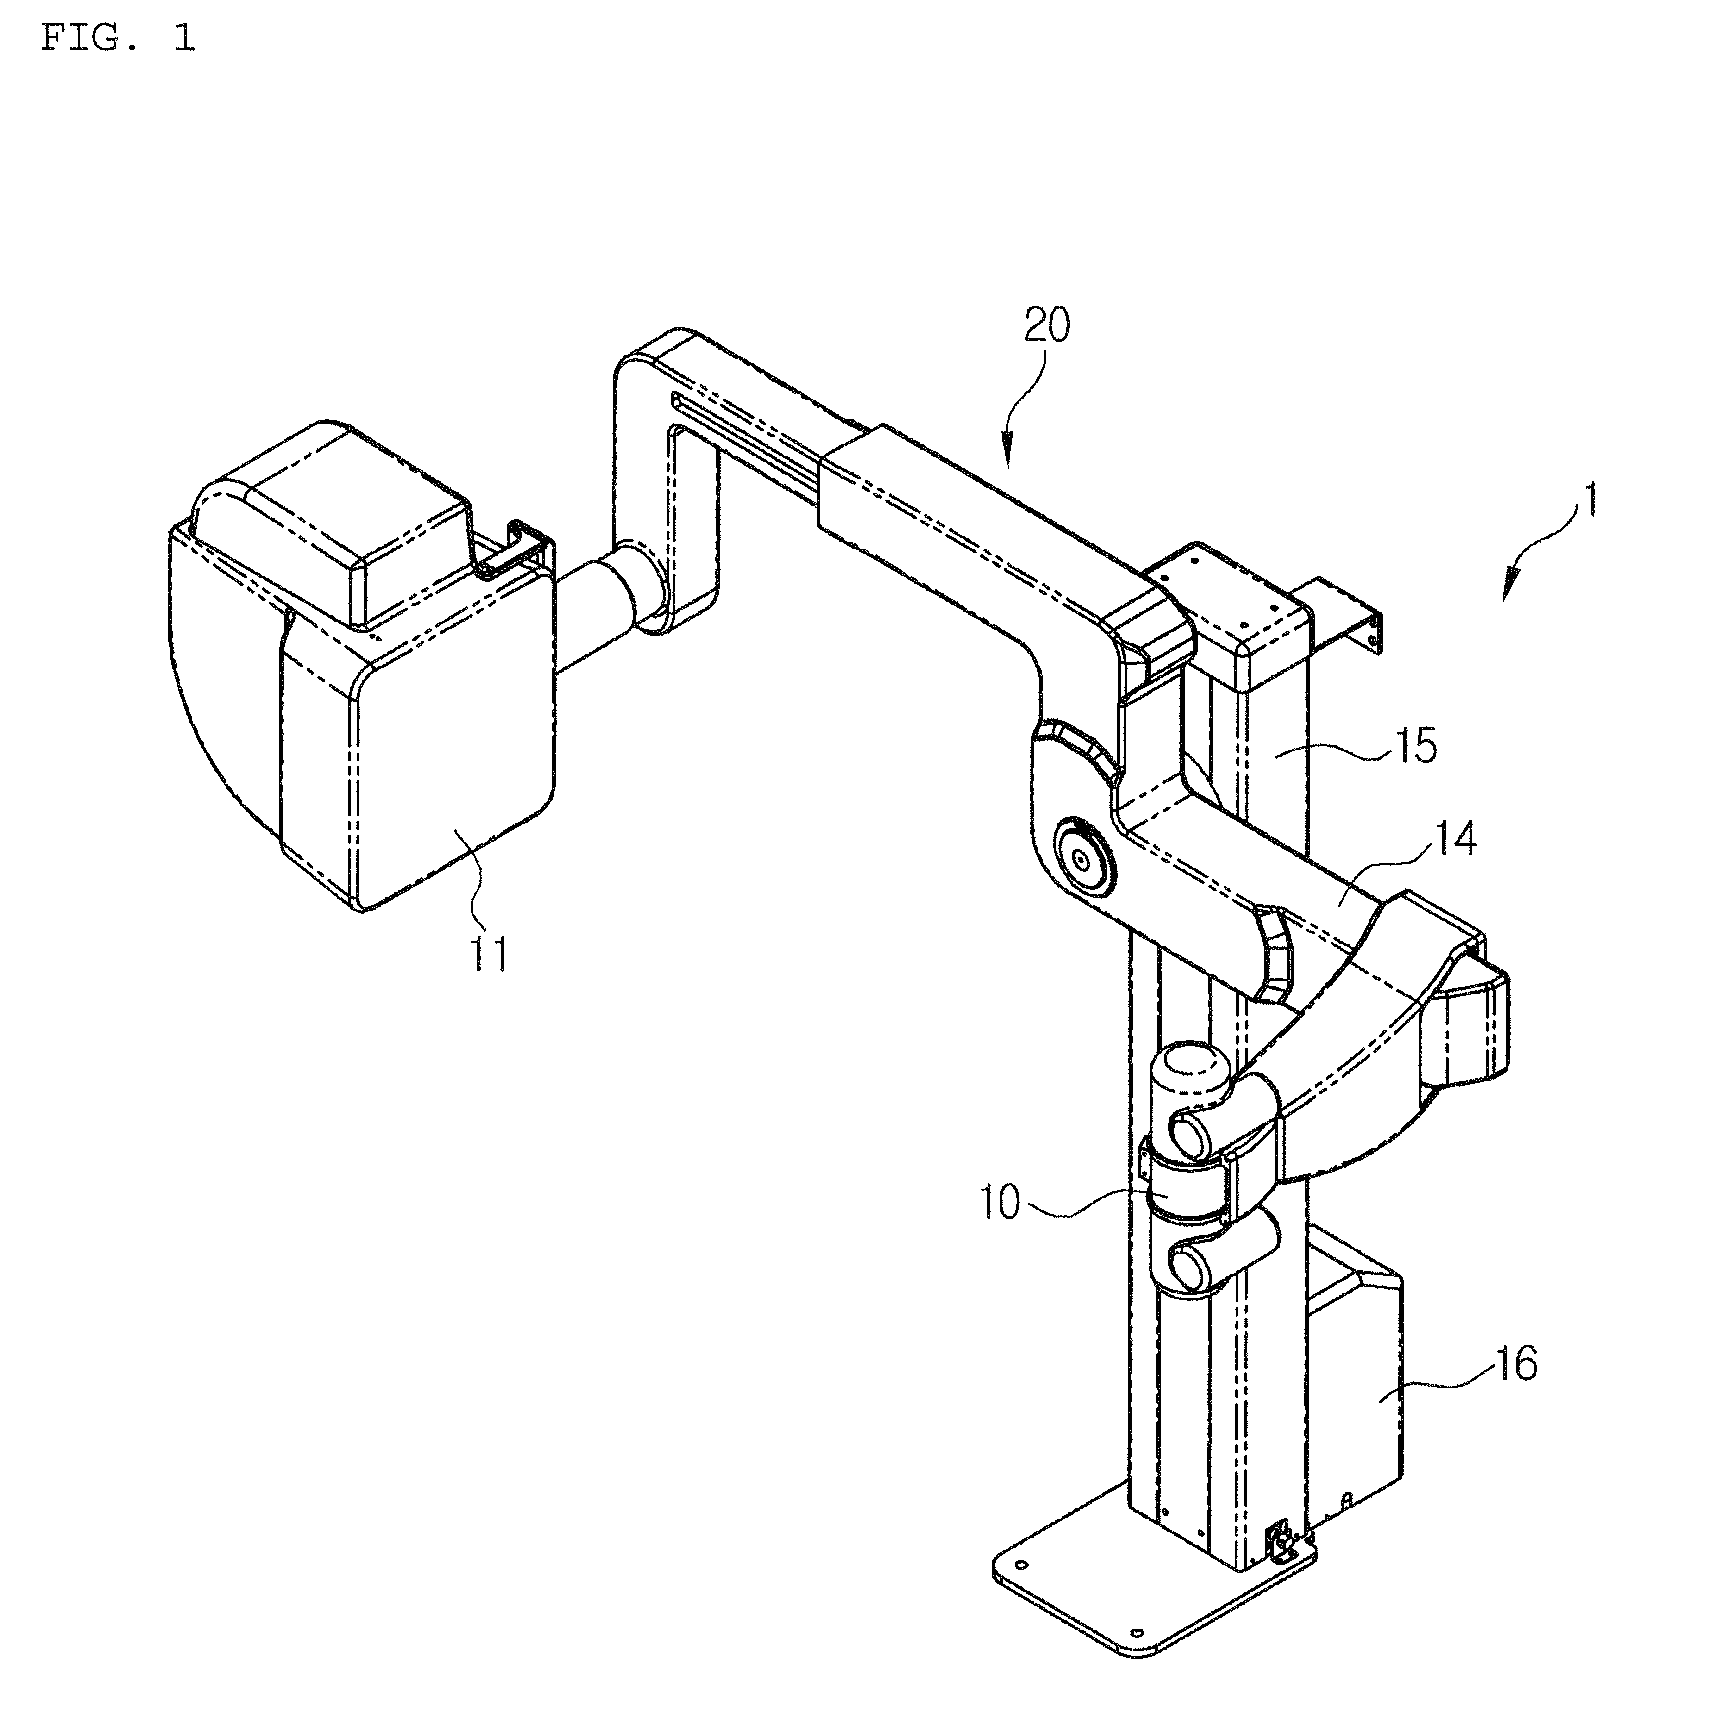 Medical diagnostic apparatus with length-adjustable arm structure